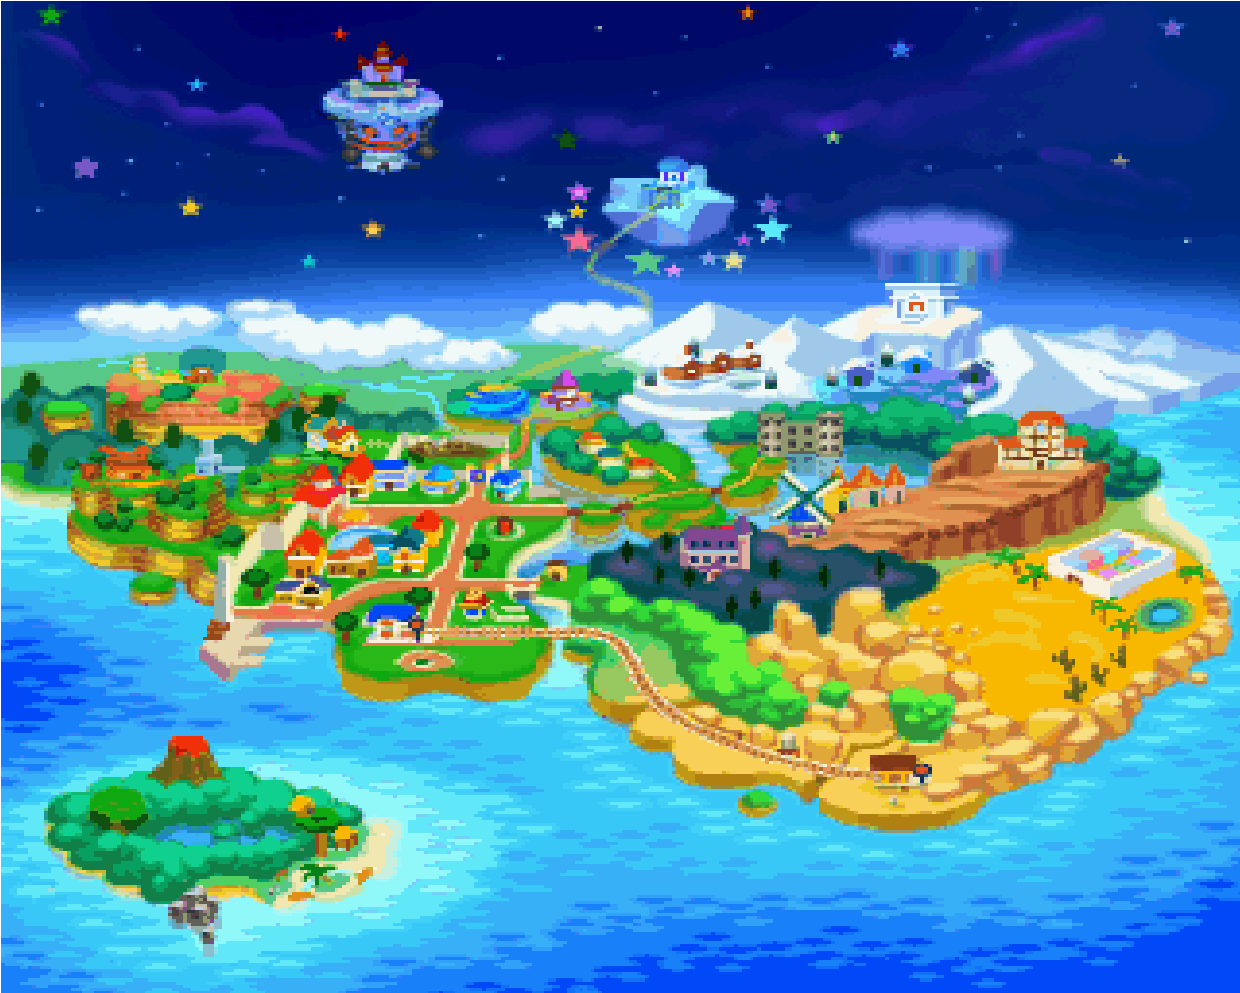 paper mario ingame map wallpaper by painbooster2 on DeviantArt